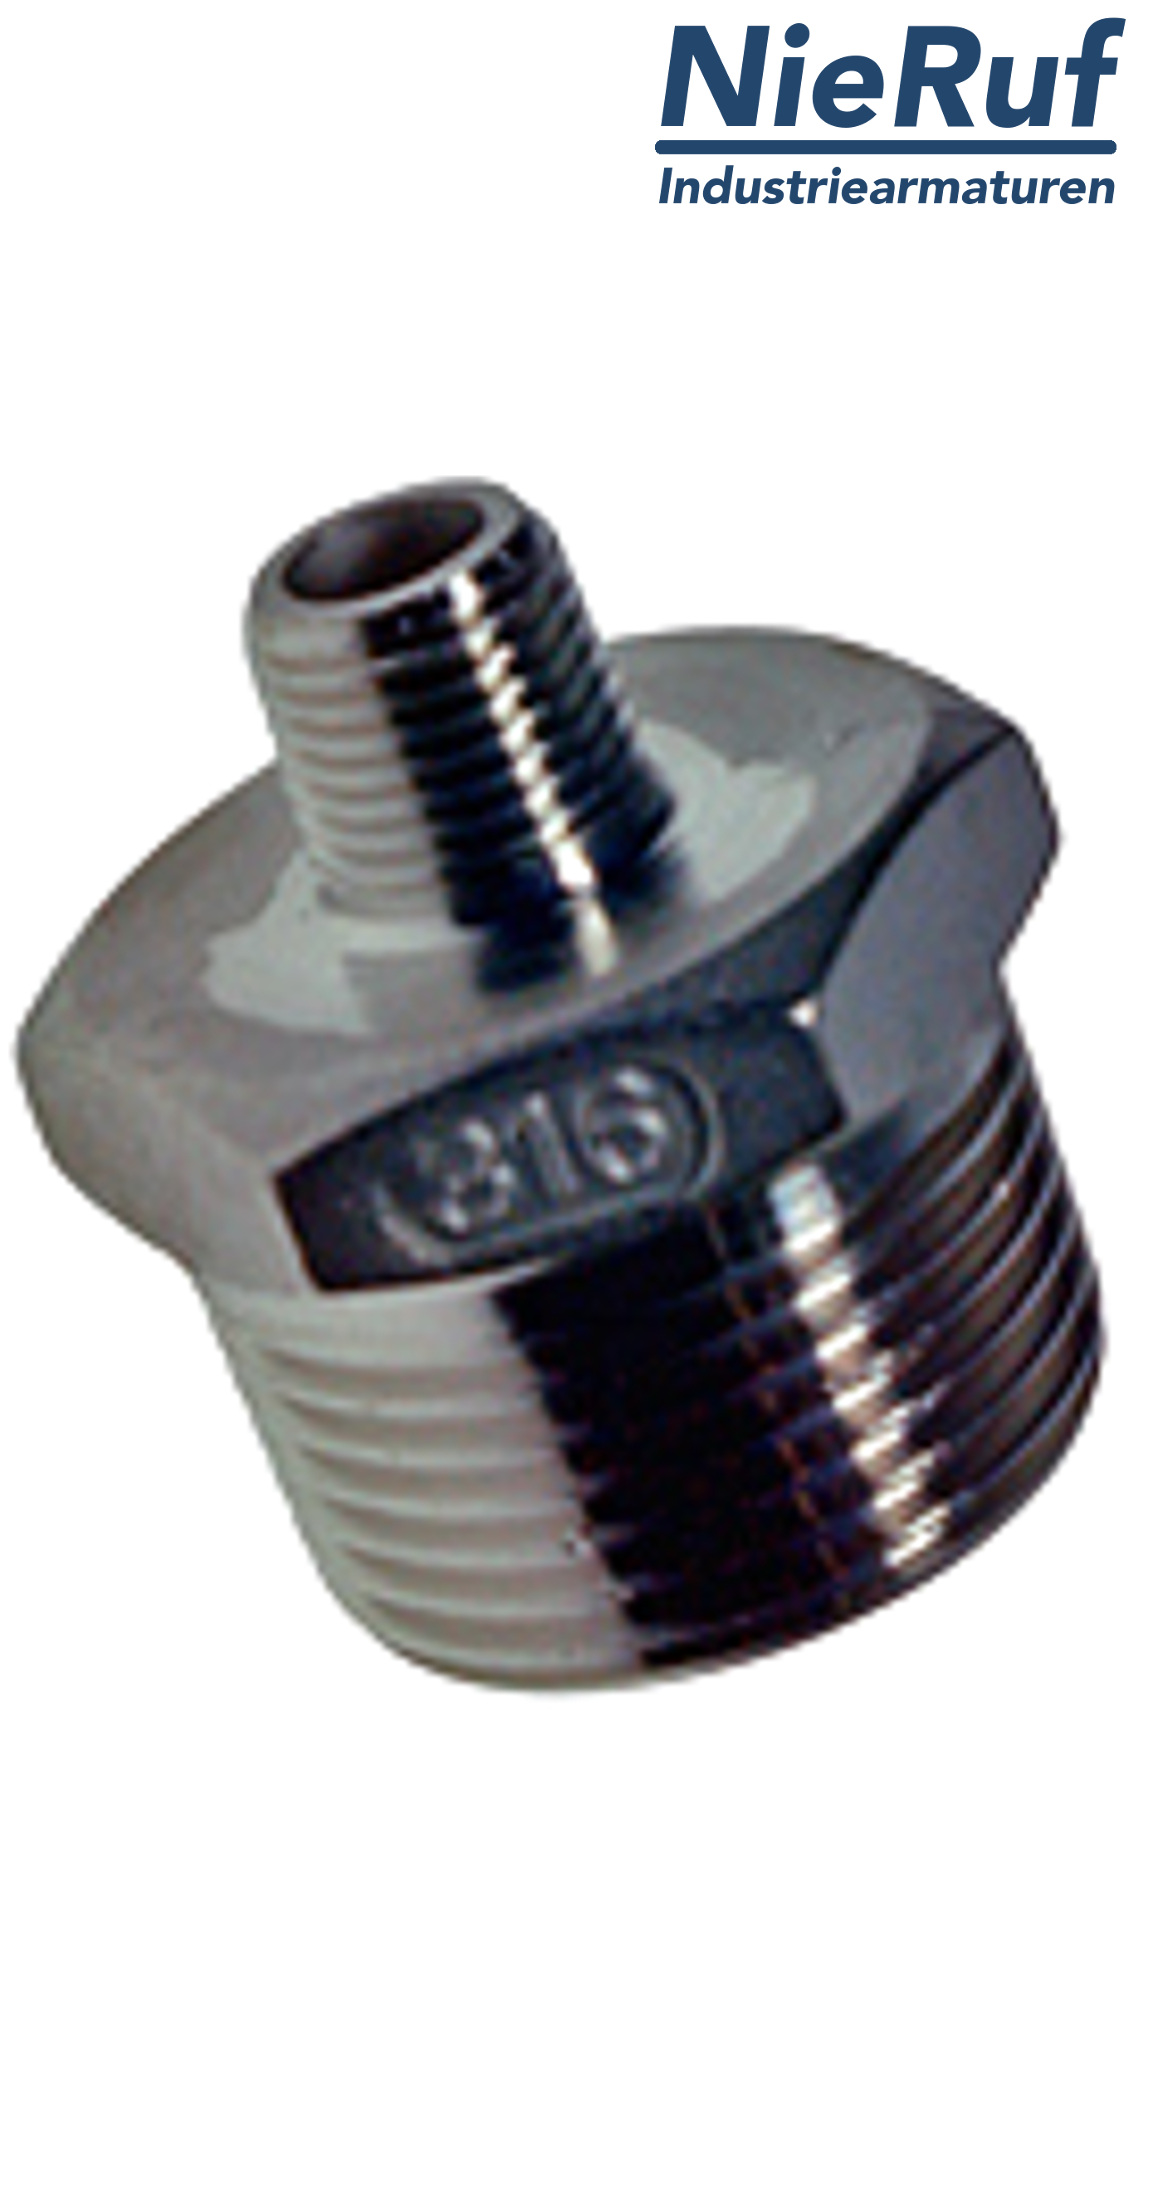 reducing nipple 1" x 1/2" inch NPT male stainless steel 316L